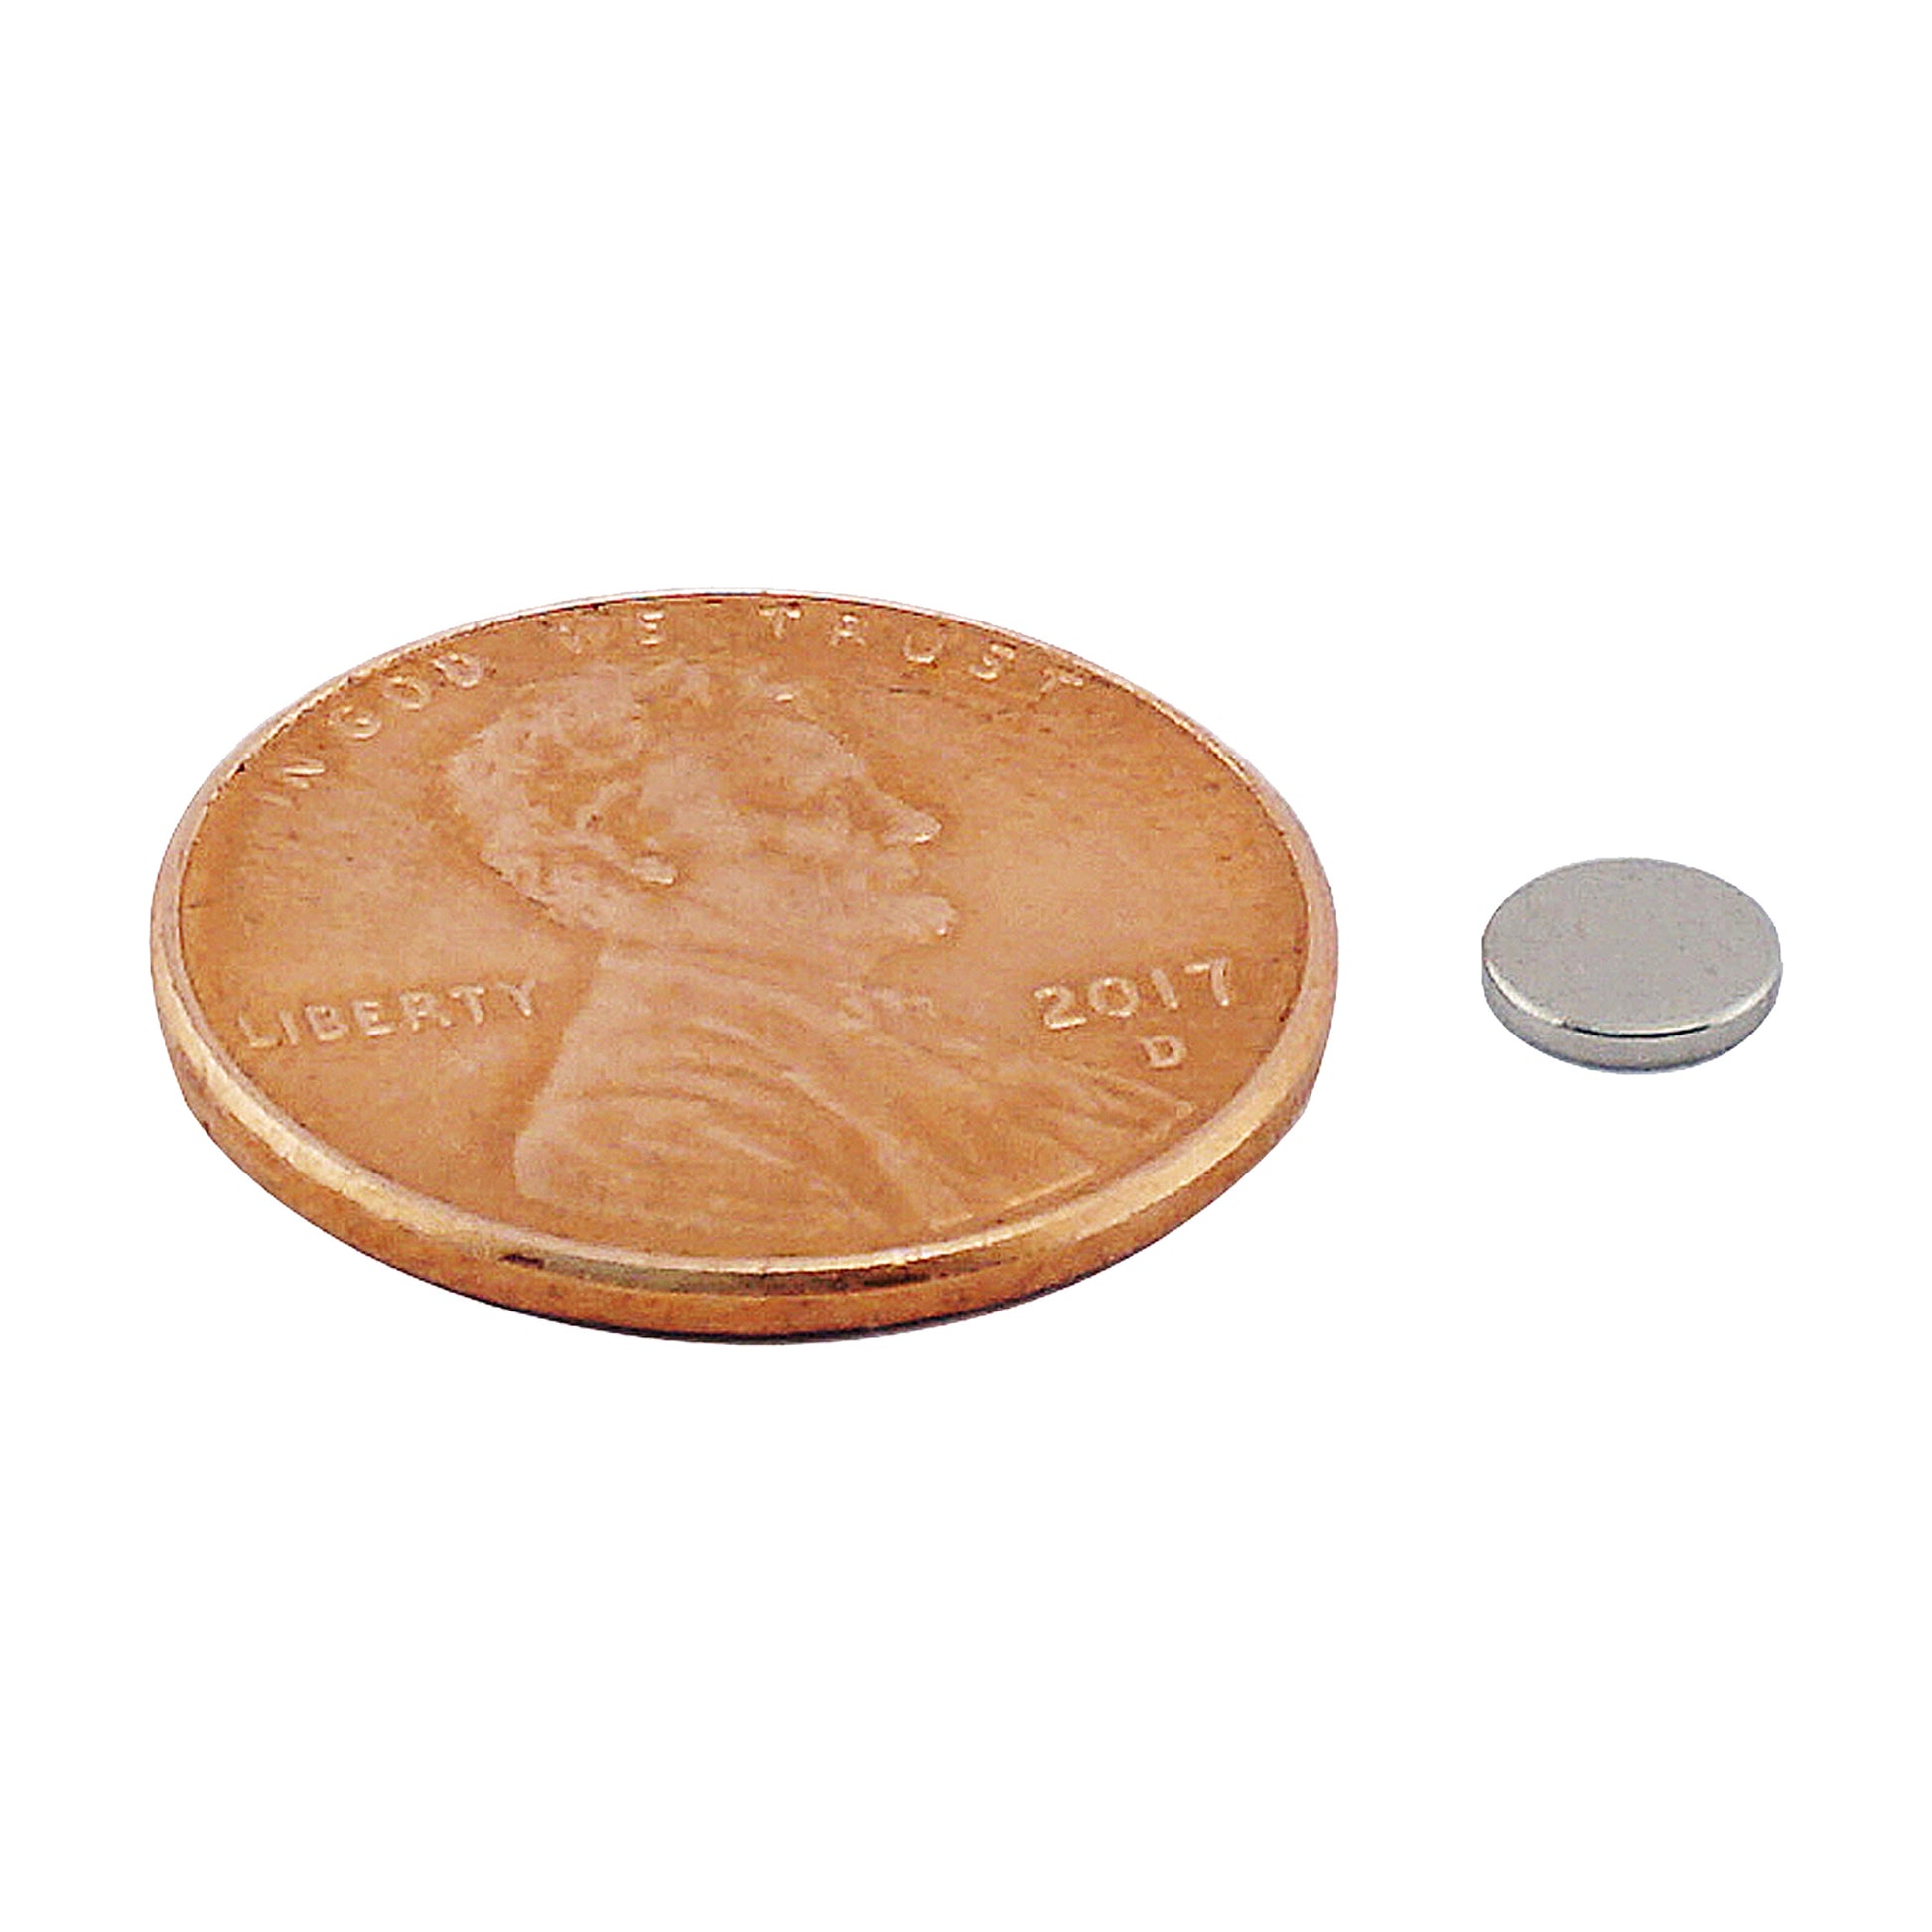 Load image into Gallery viewer, ND45-1803N Neodymium Disc Magnet - Compared to Penny for Size Reference